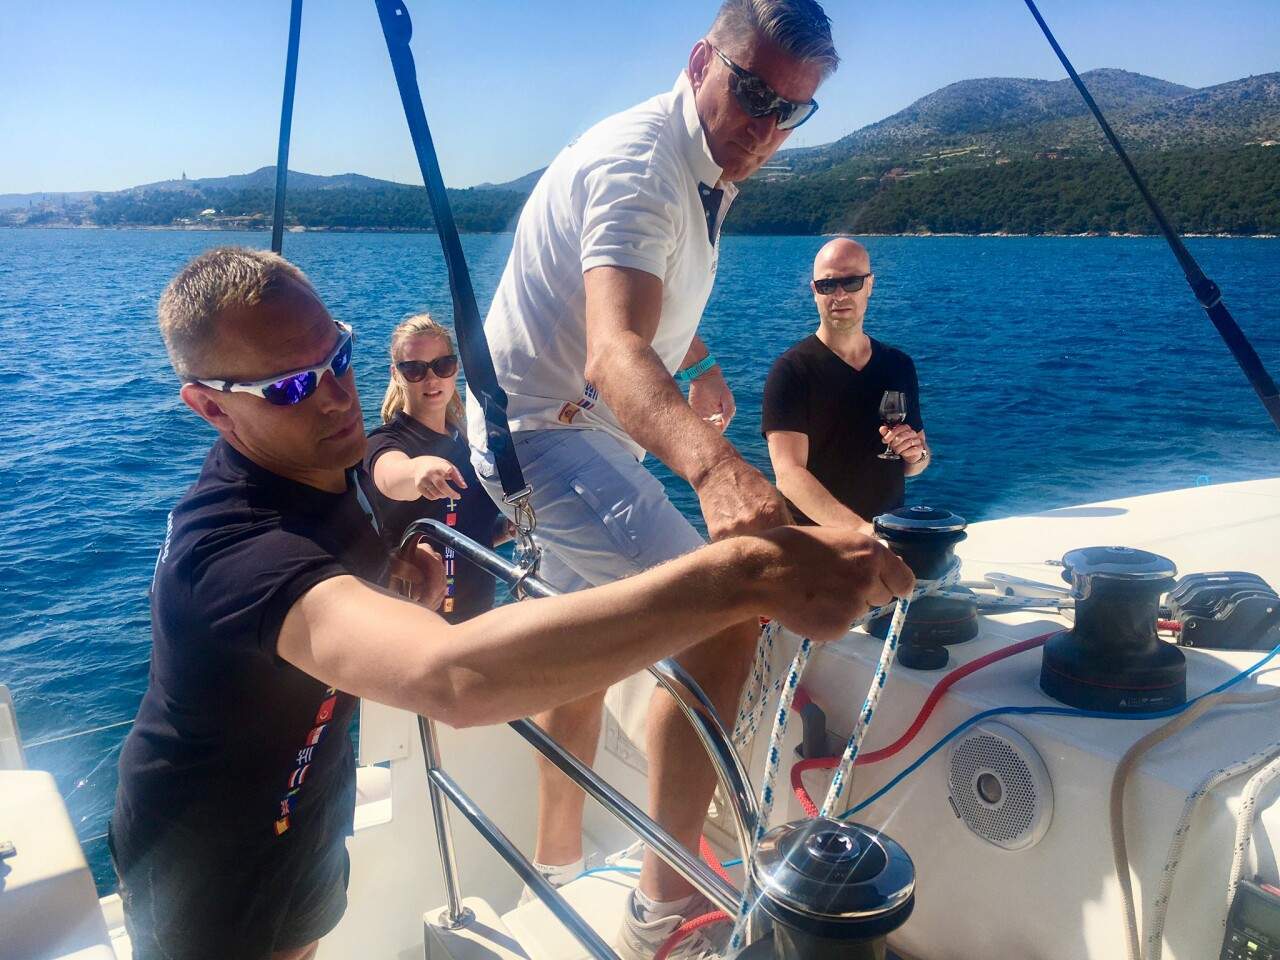 A Look Inside: Maneuvering Course and Sea Trial in Croatia